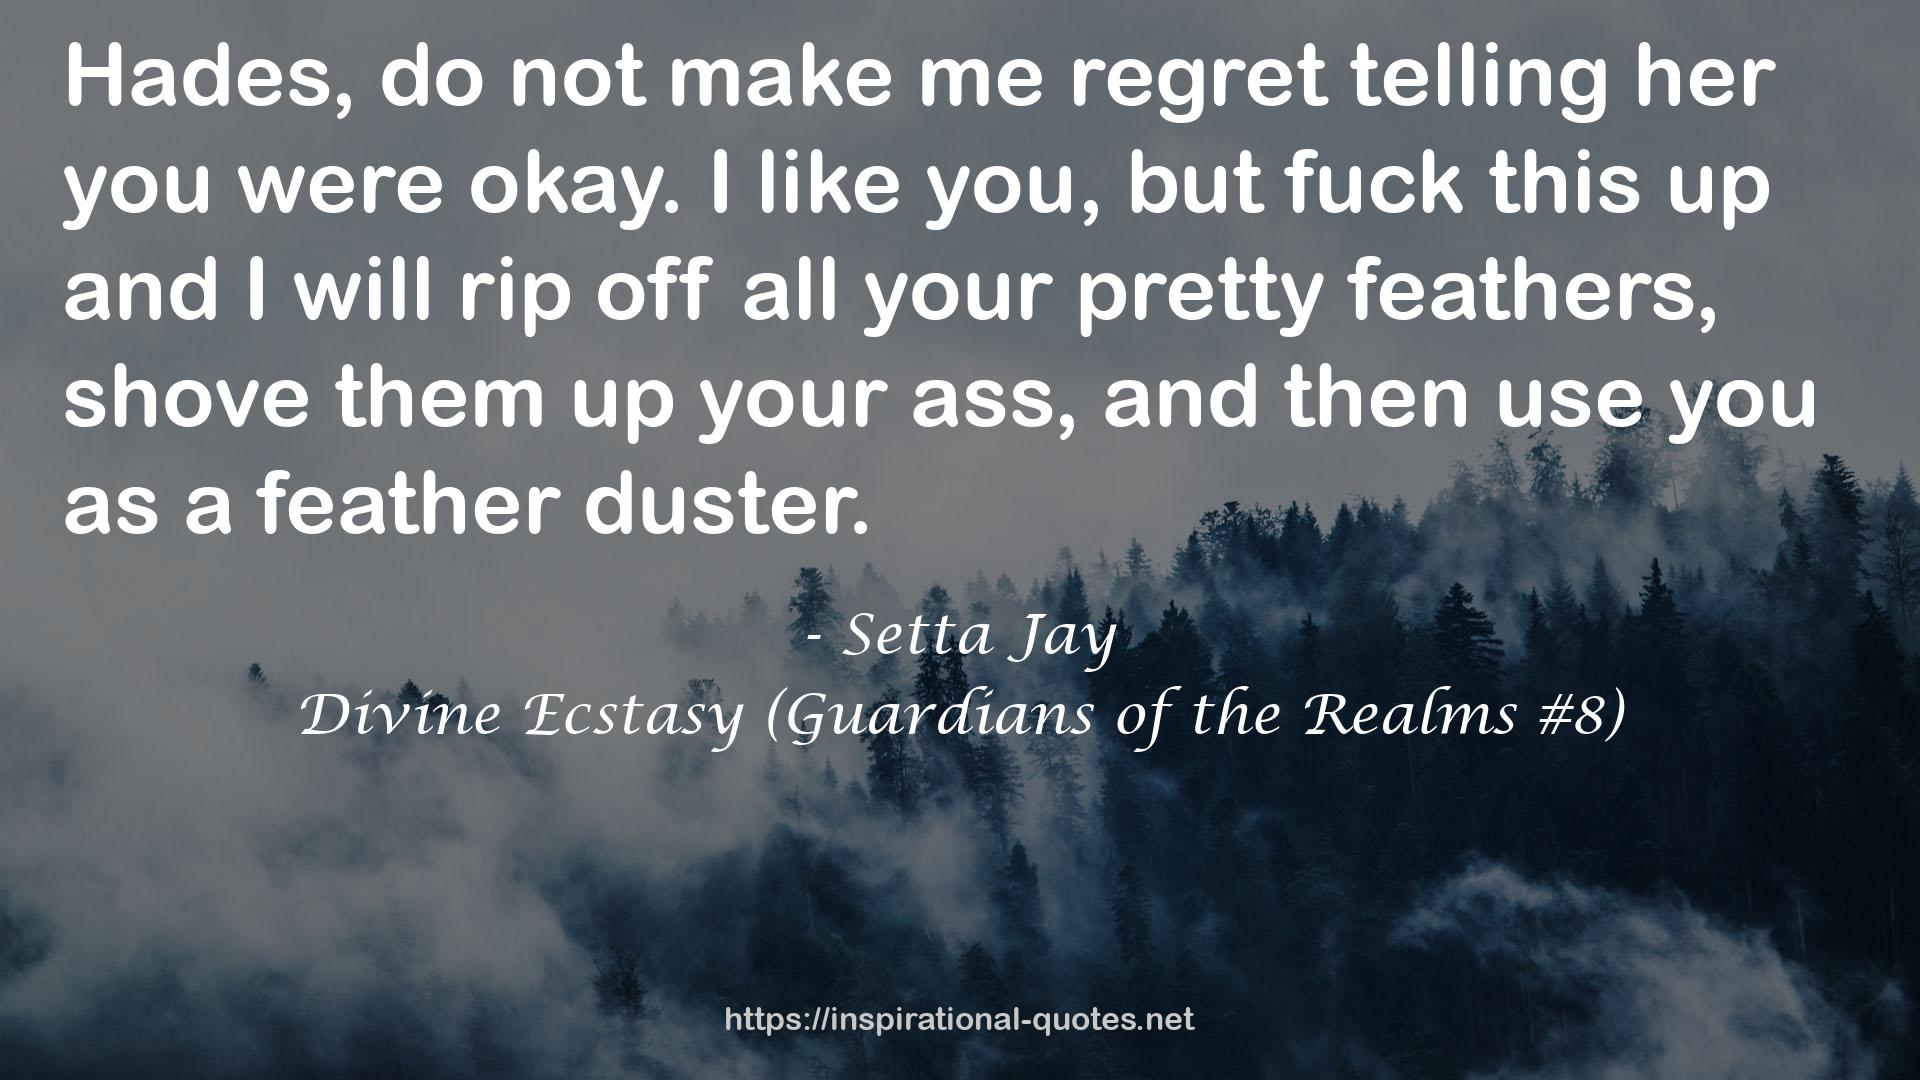 Divine Ecstasy (Guardians of the Realms #8) QUOTES